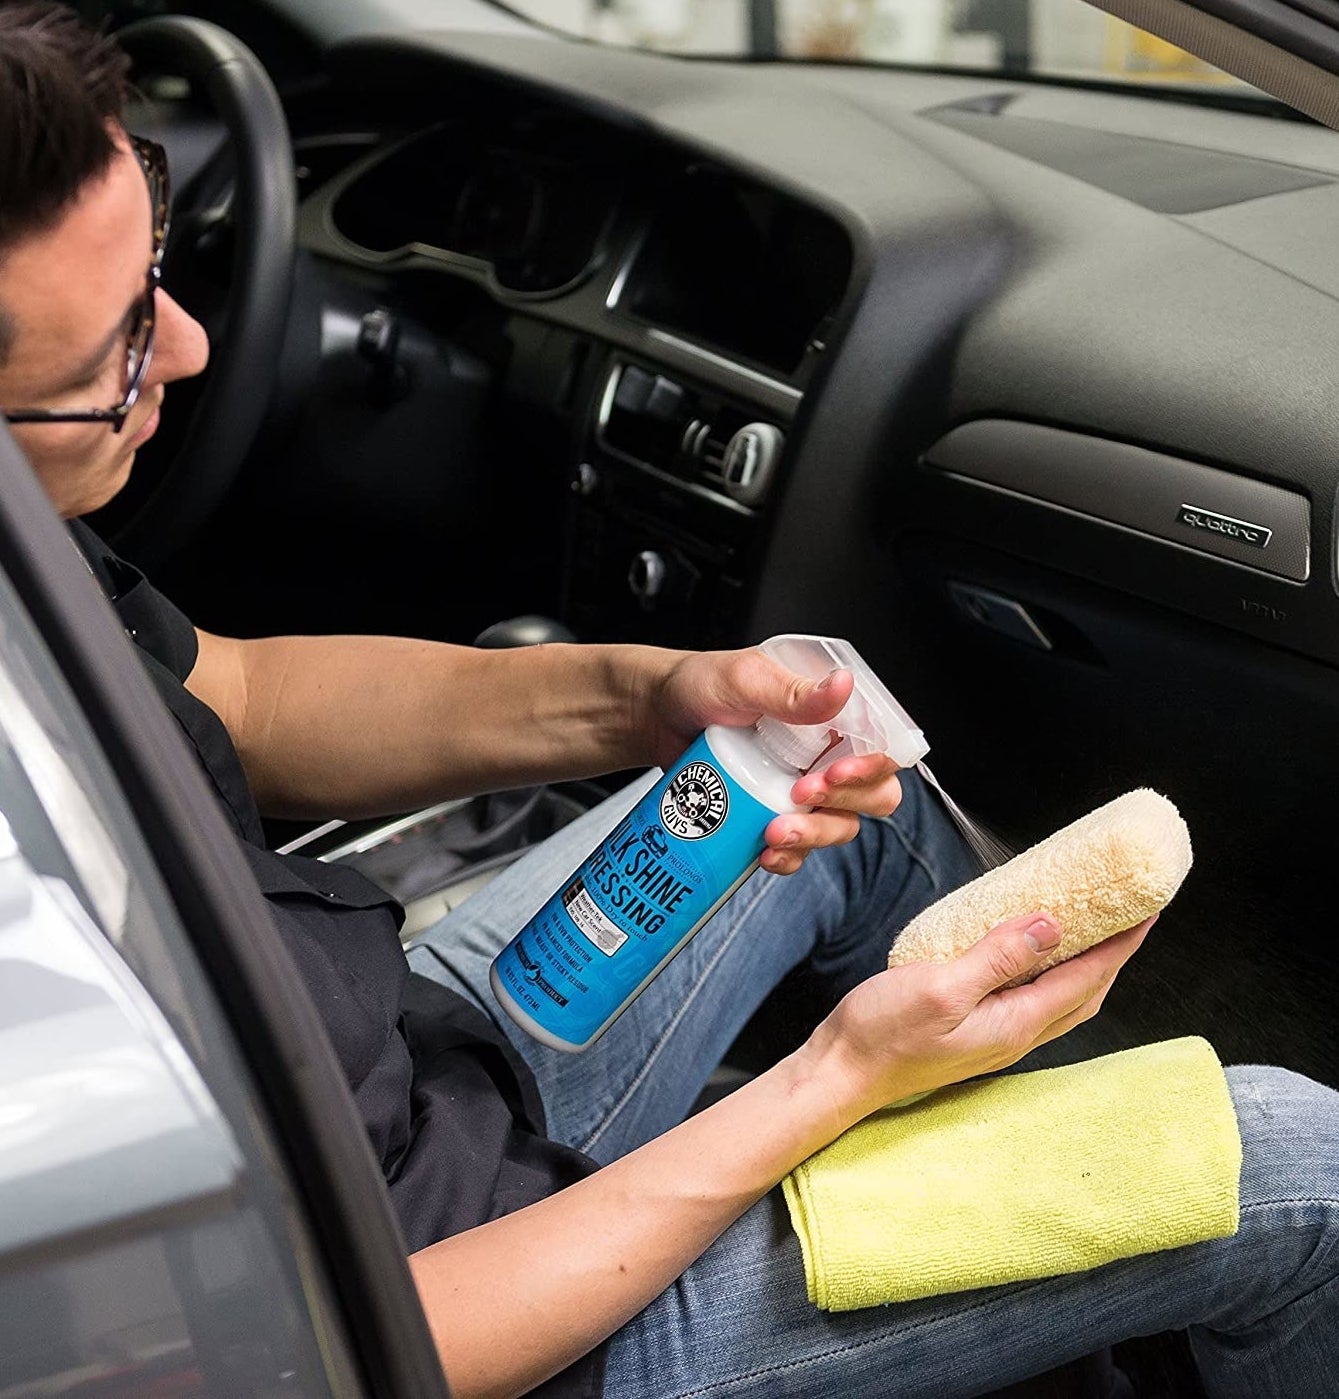 A person sprays the protective spray onto a sponge while sitting in a car